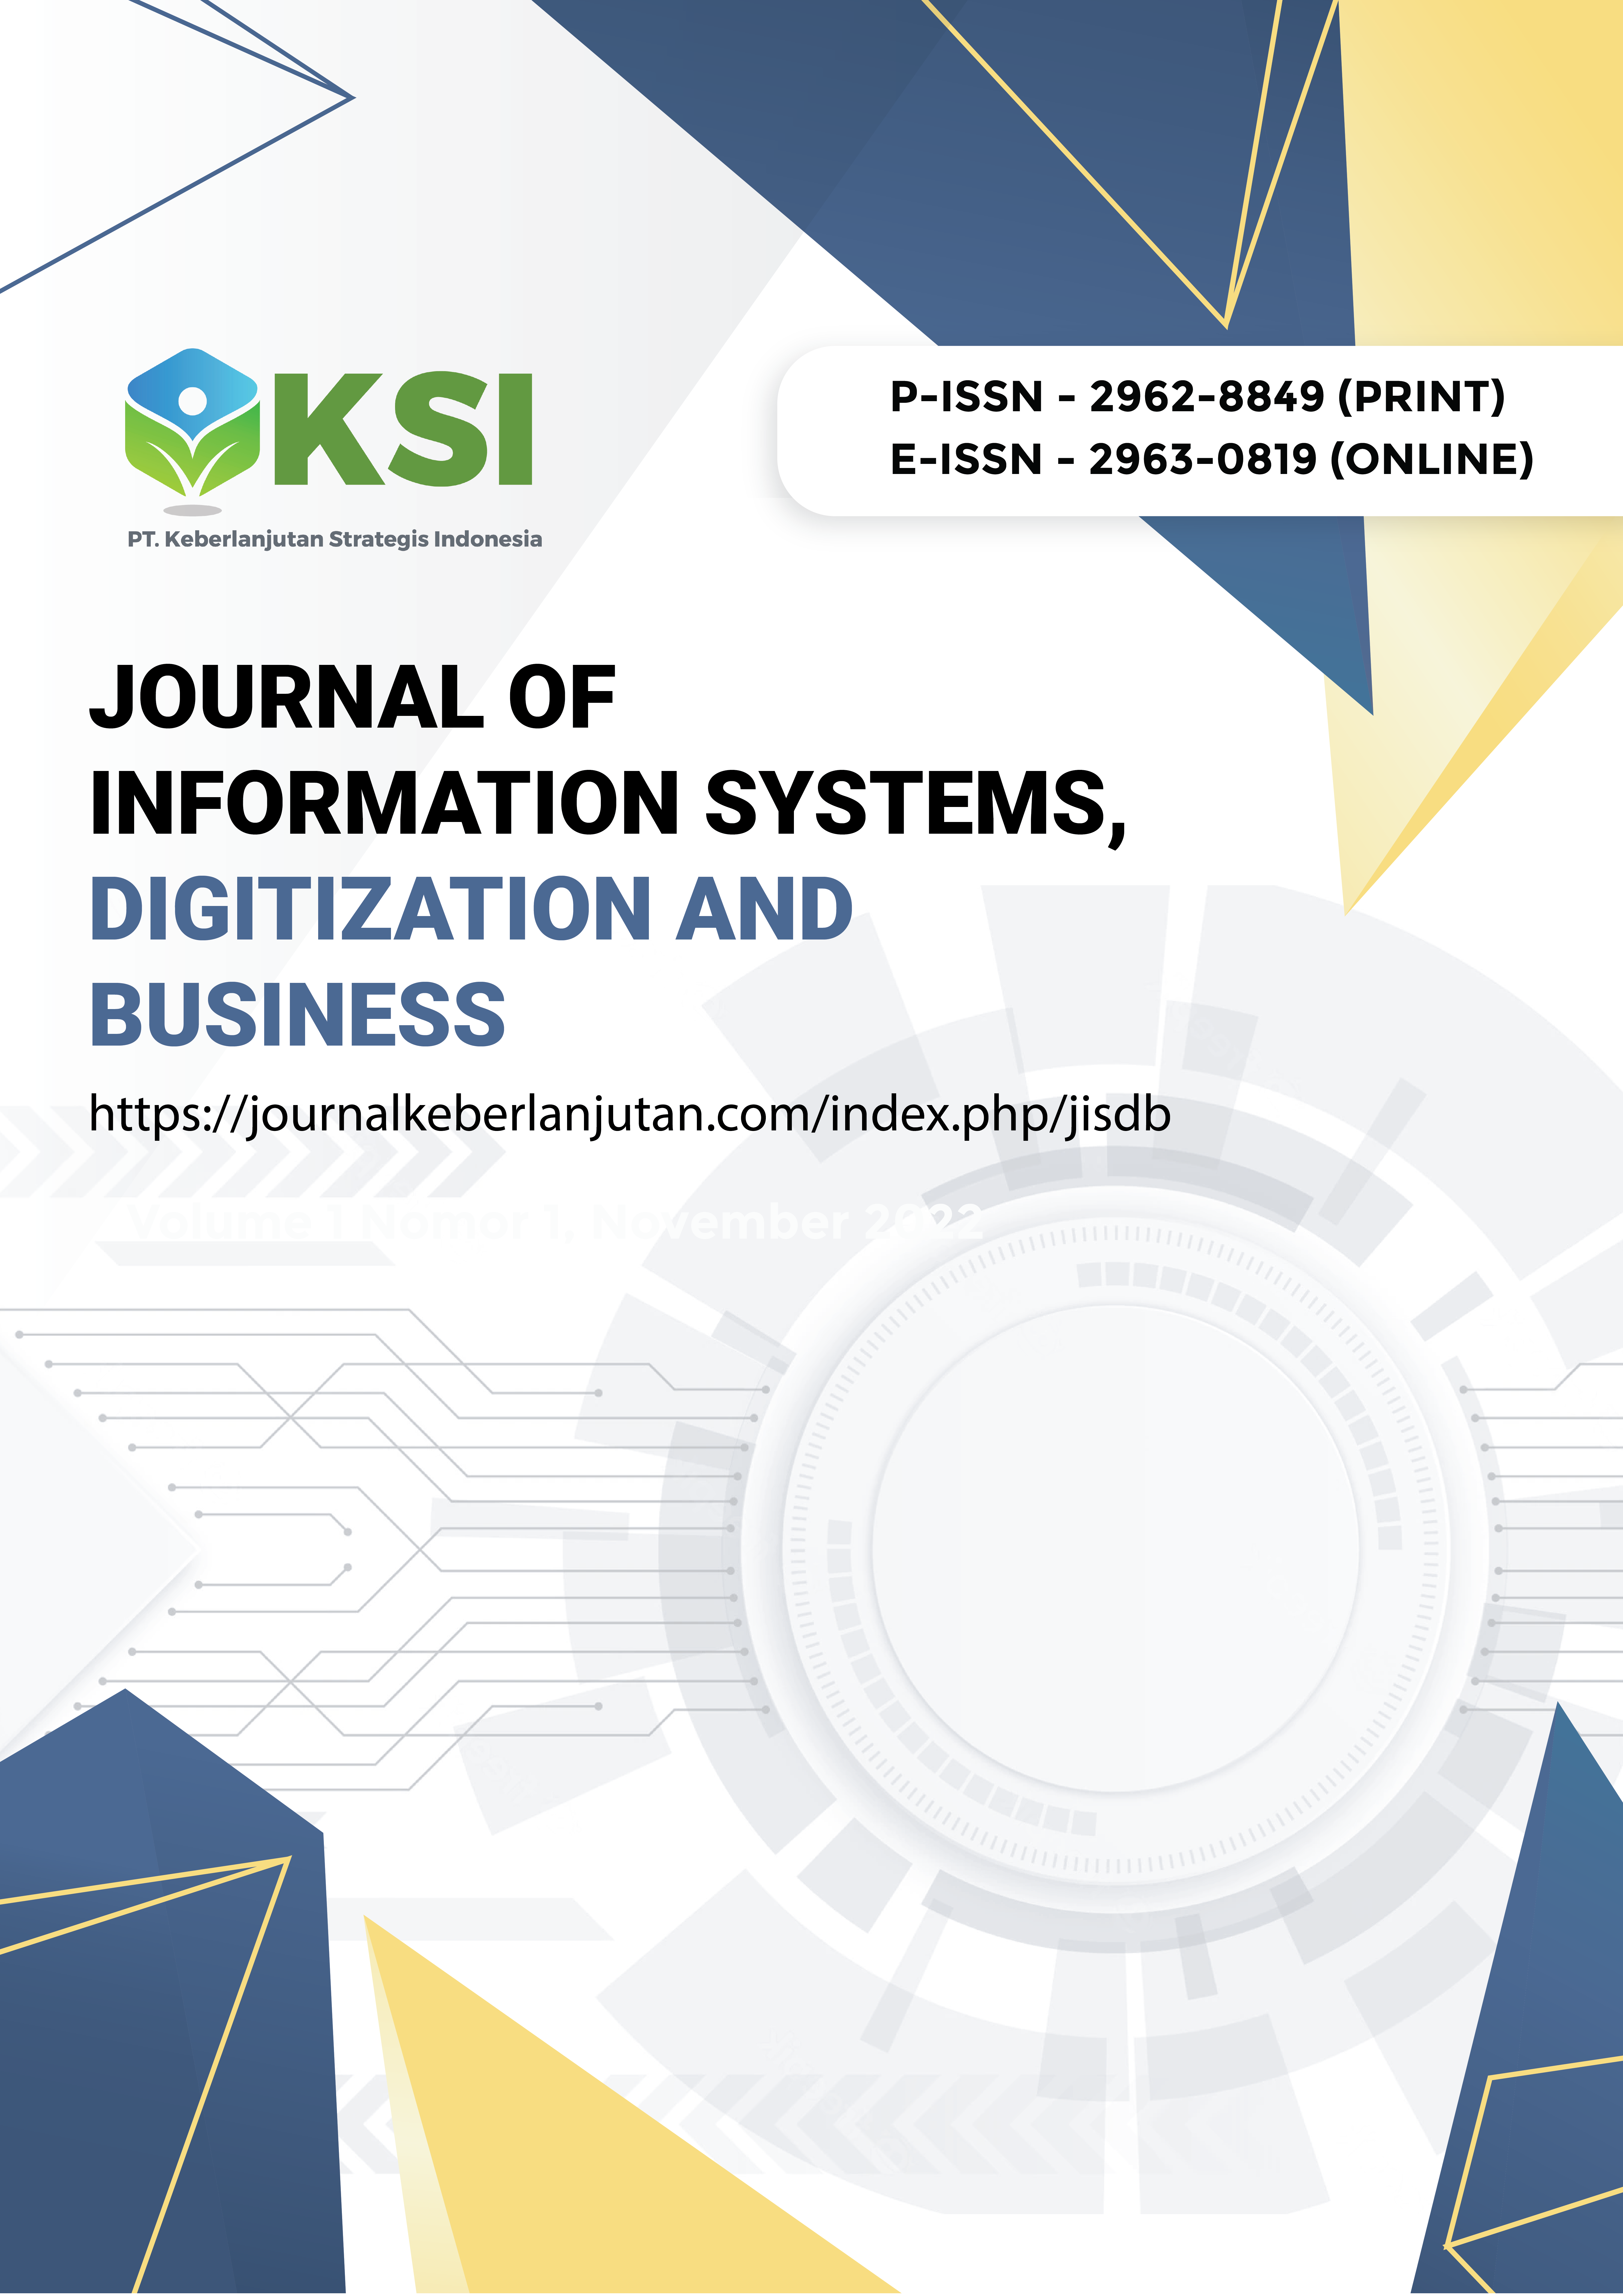 Journal of Information Systems, Digitization and Business